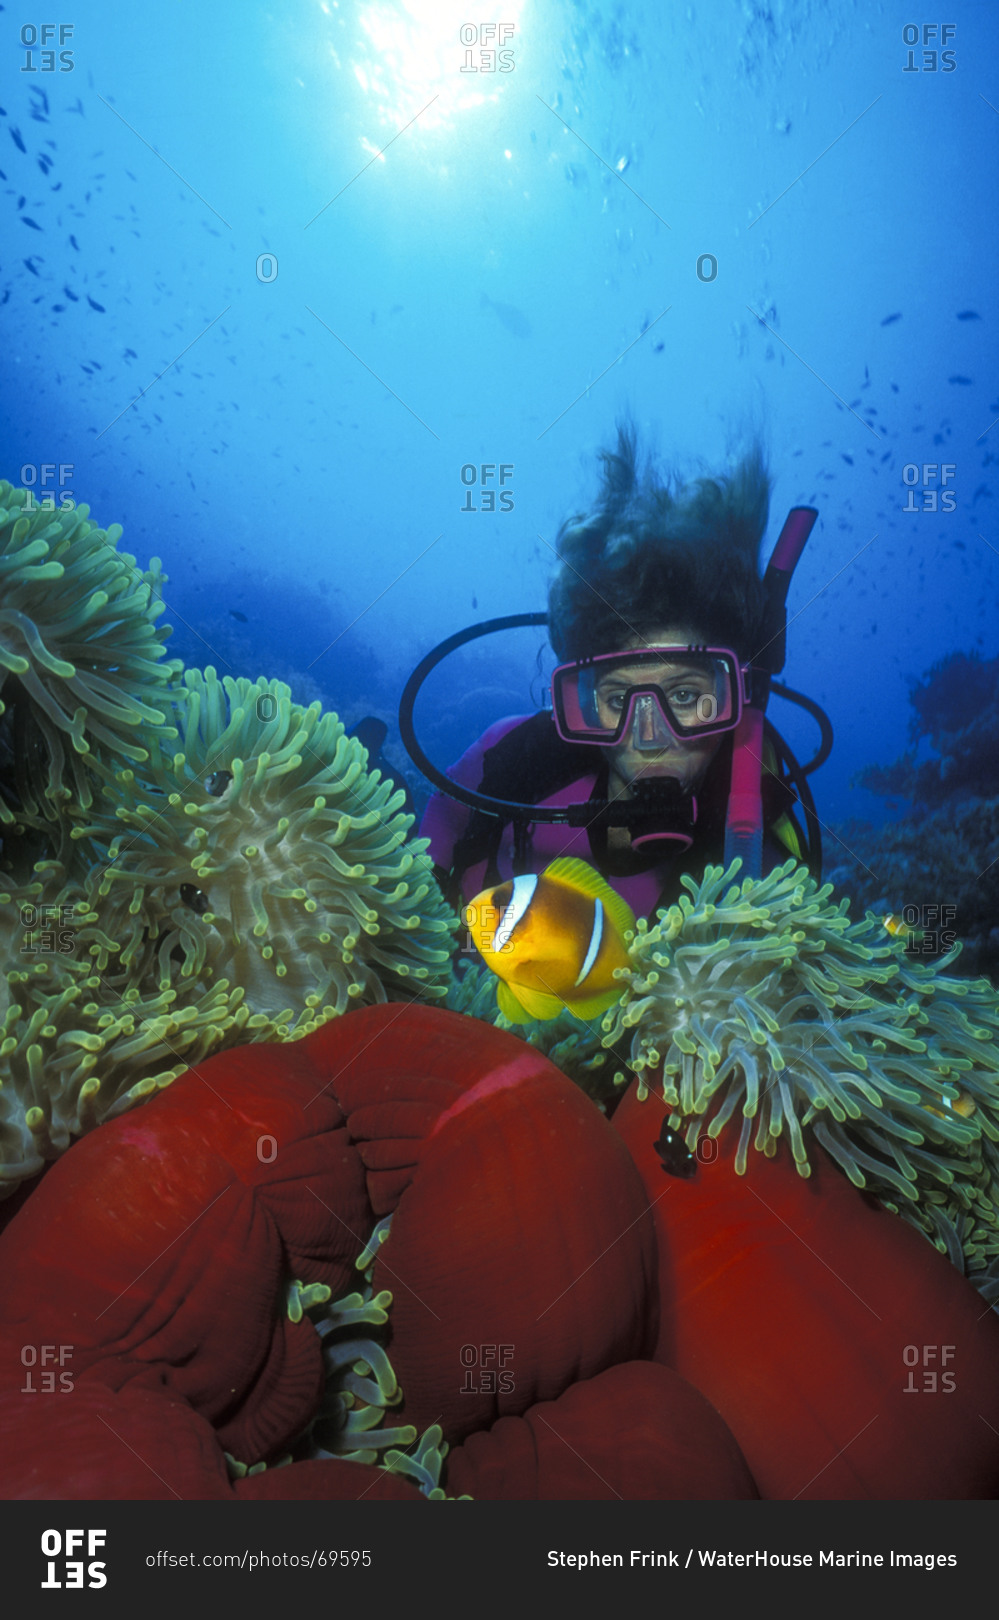 Diver watches a Red Sea anemonefish hovering over a colorful magnificent sea anemone